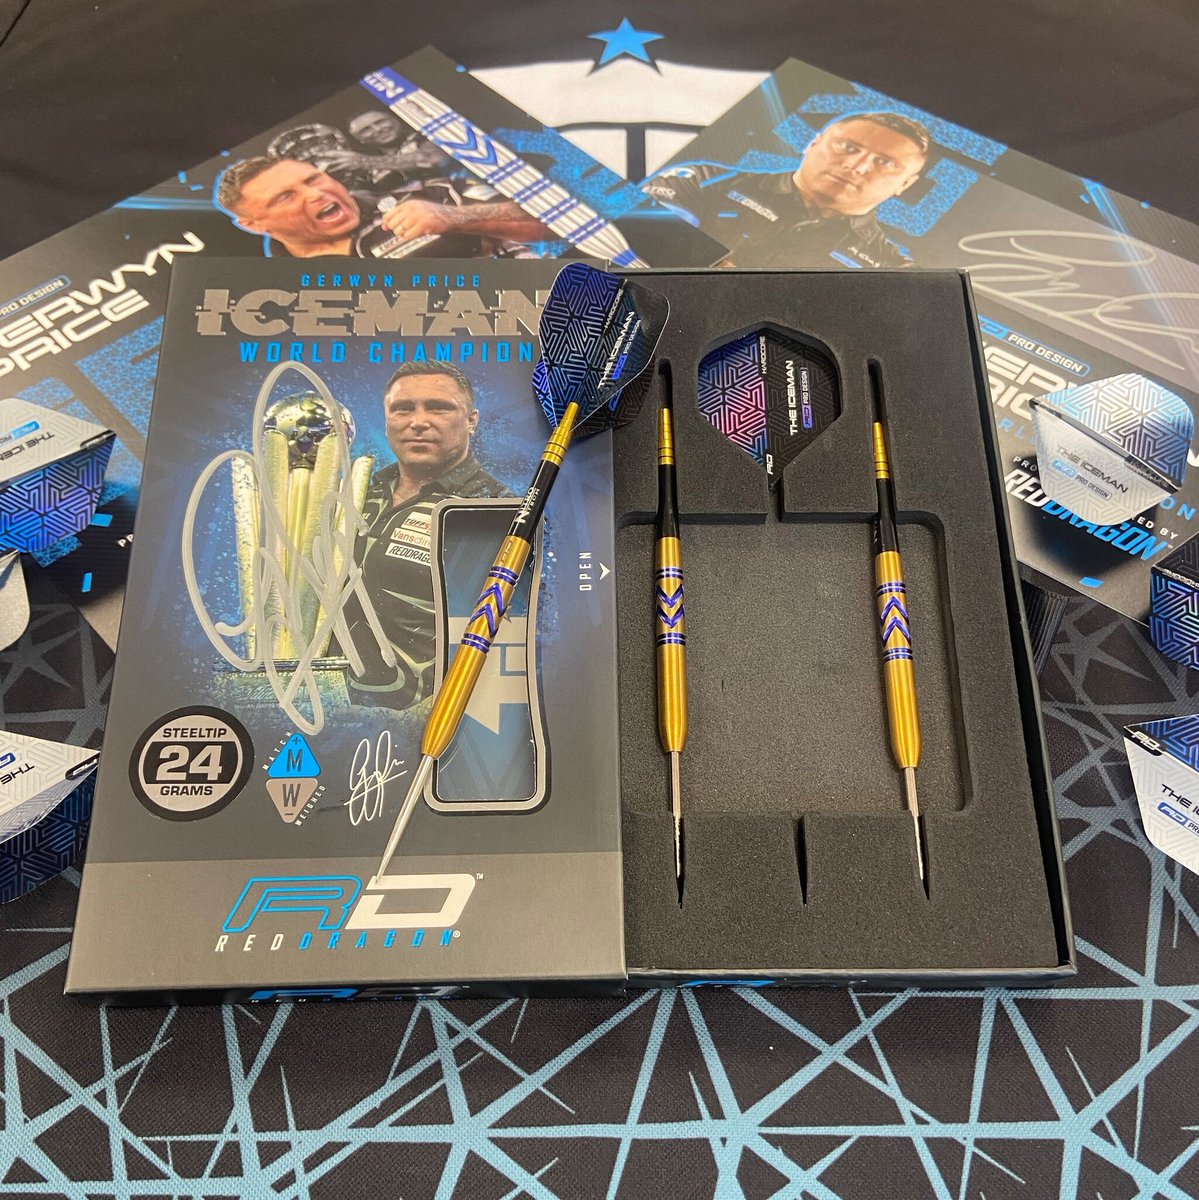 COMPETITION| Win a set of Gerwyn Price Signed Darts🎯 Celebrating Gezzy's recent form, we are giving away a SIGNED set of Avalanche Gold. TO ENTER: 1. Share this post 2. Tag a friend 3. Follow Red Dragon Darts Winner will be announced on the 4th April. Good luck! #Darts